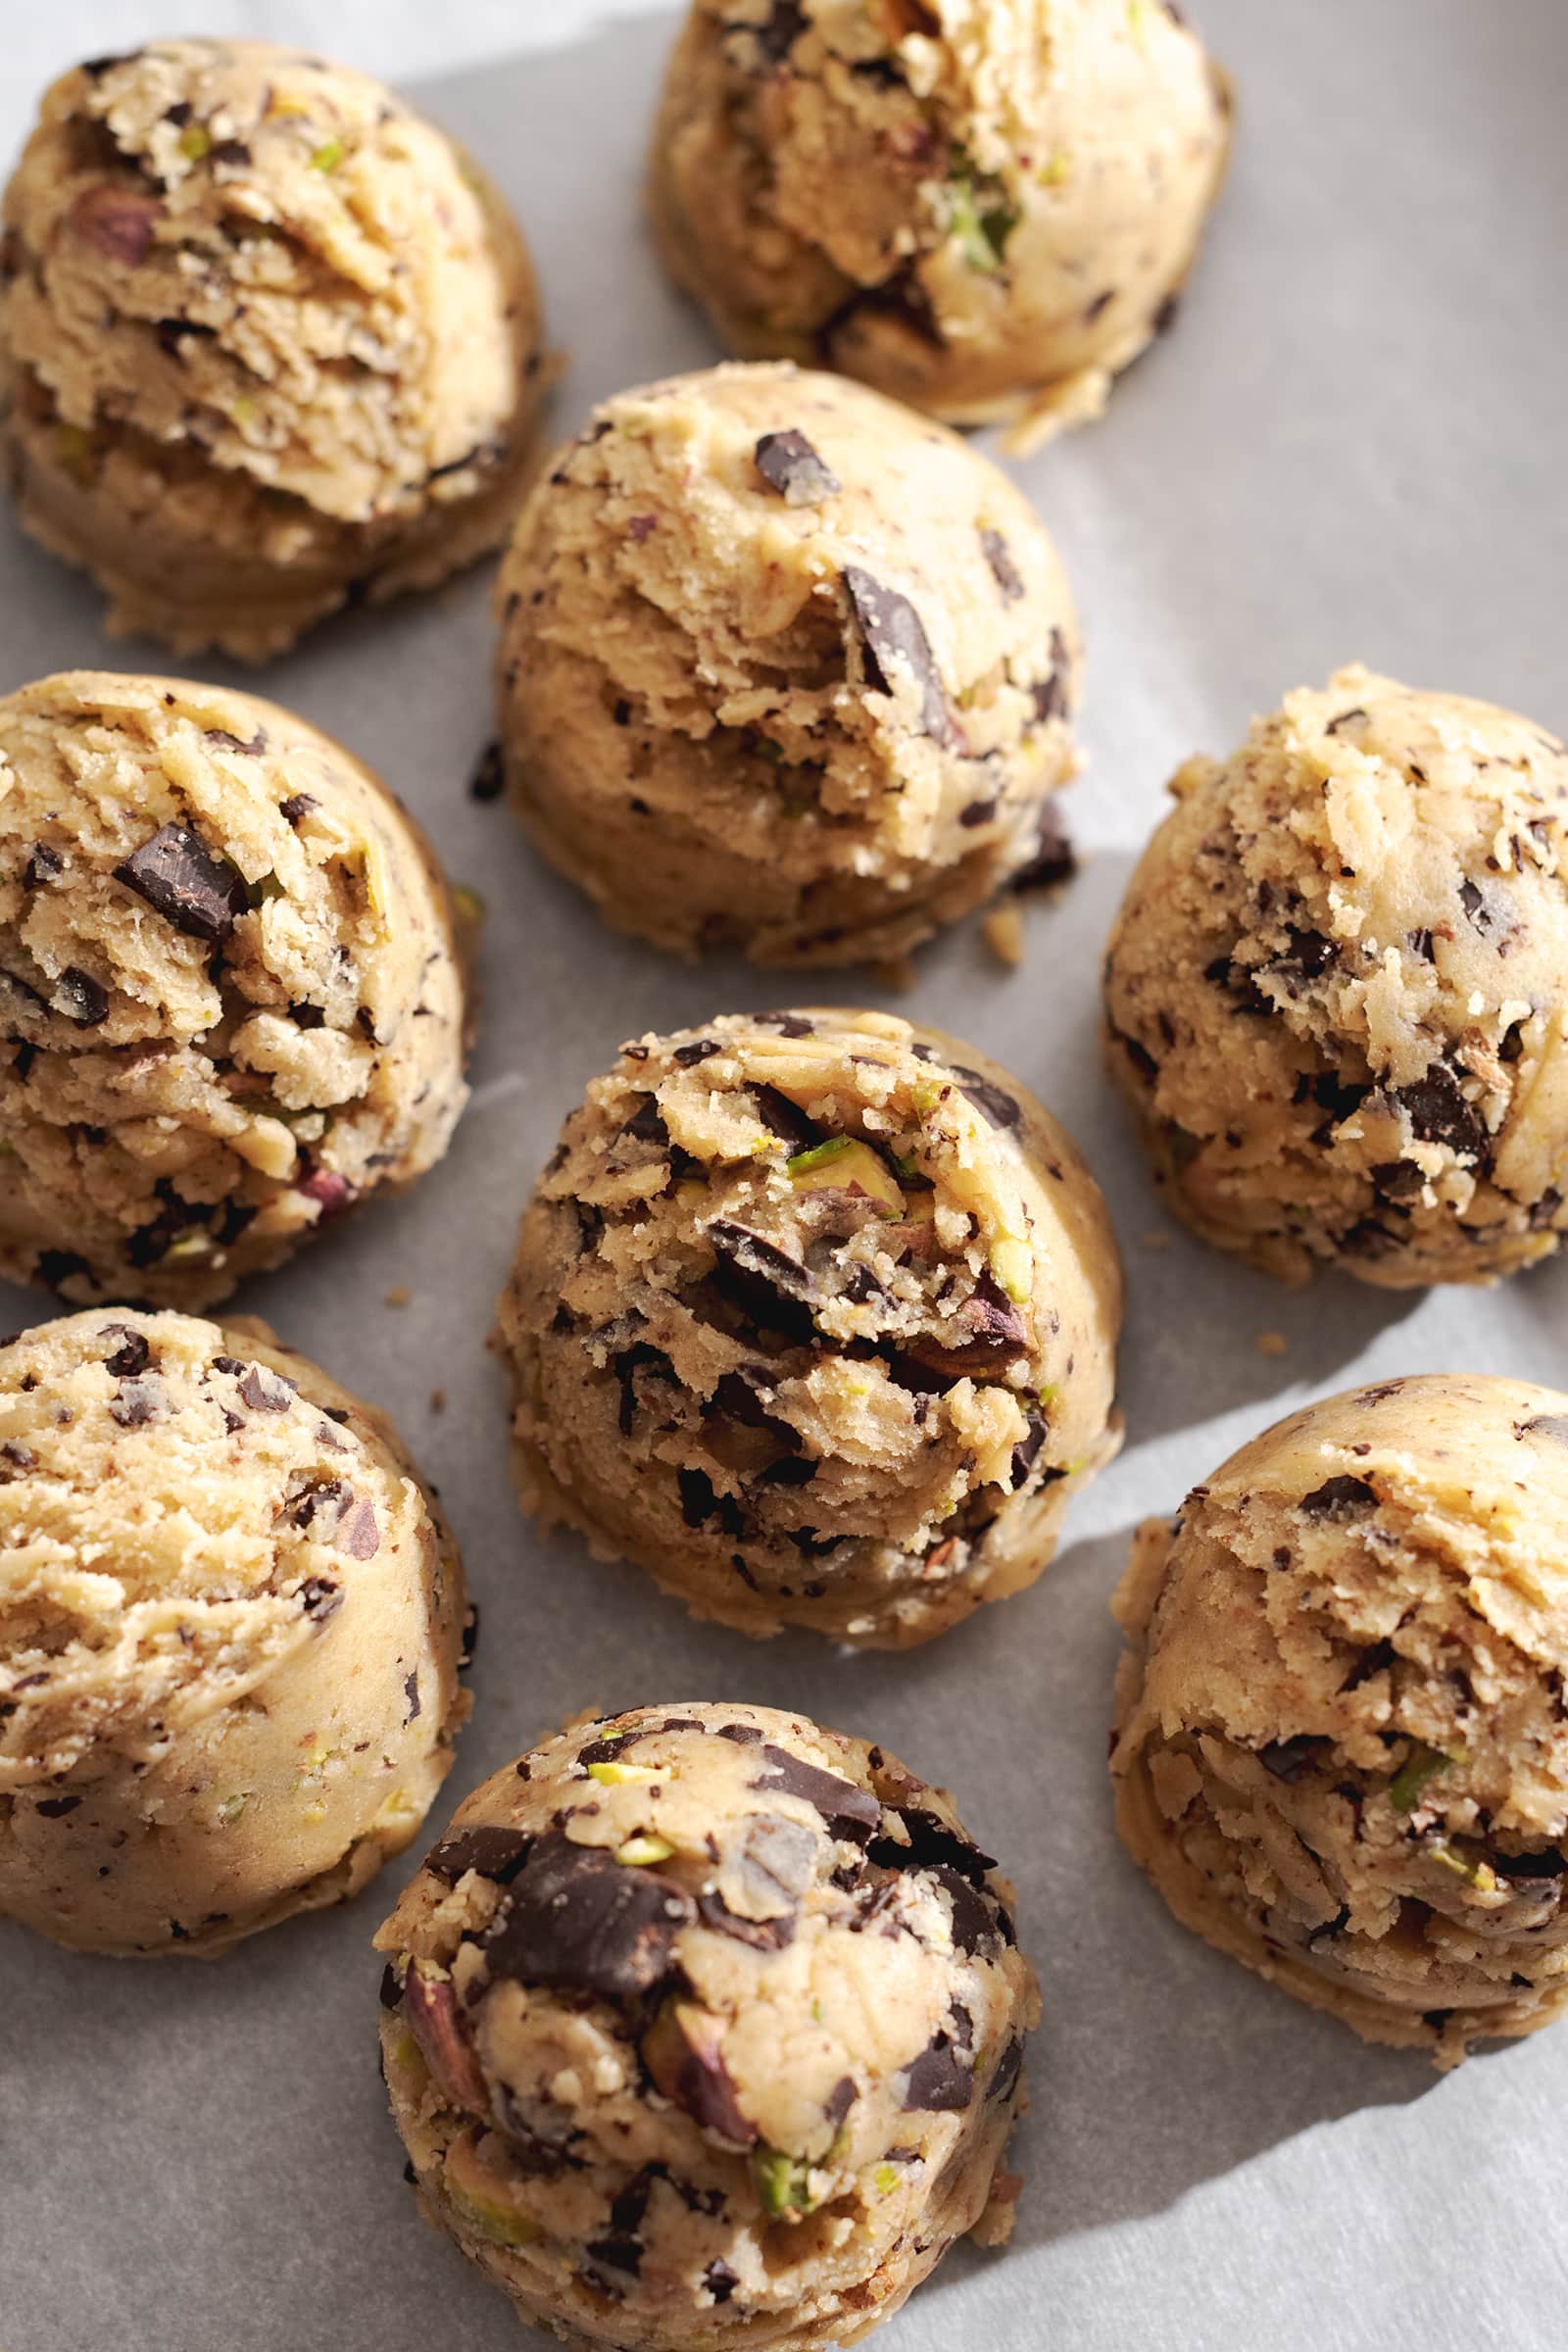 Balls of cookie dough lined up on parchment paper.